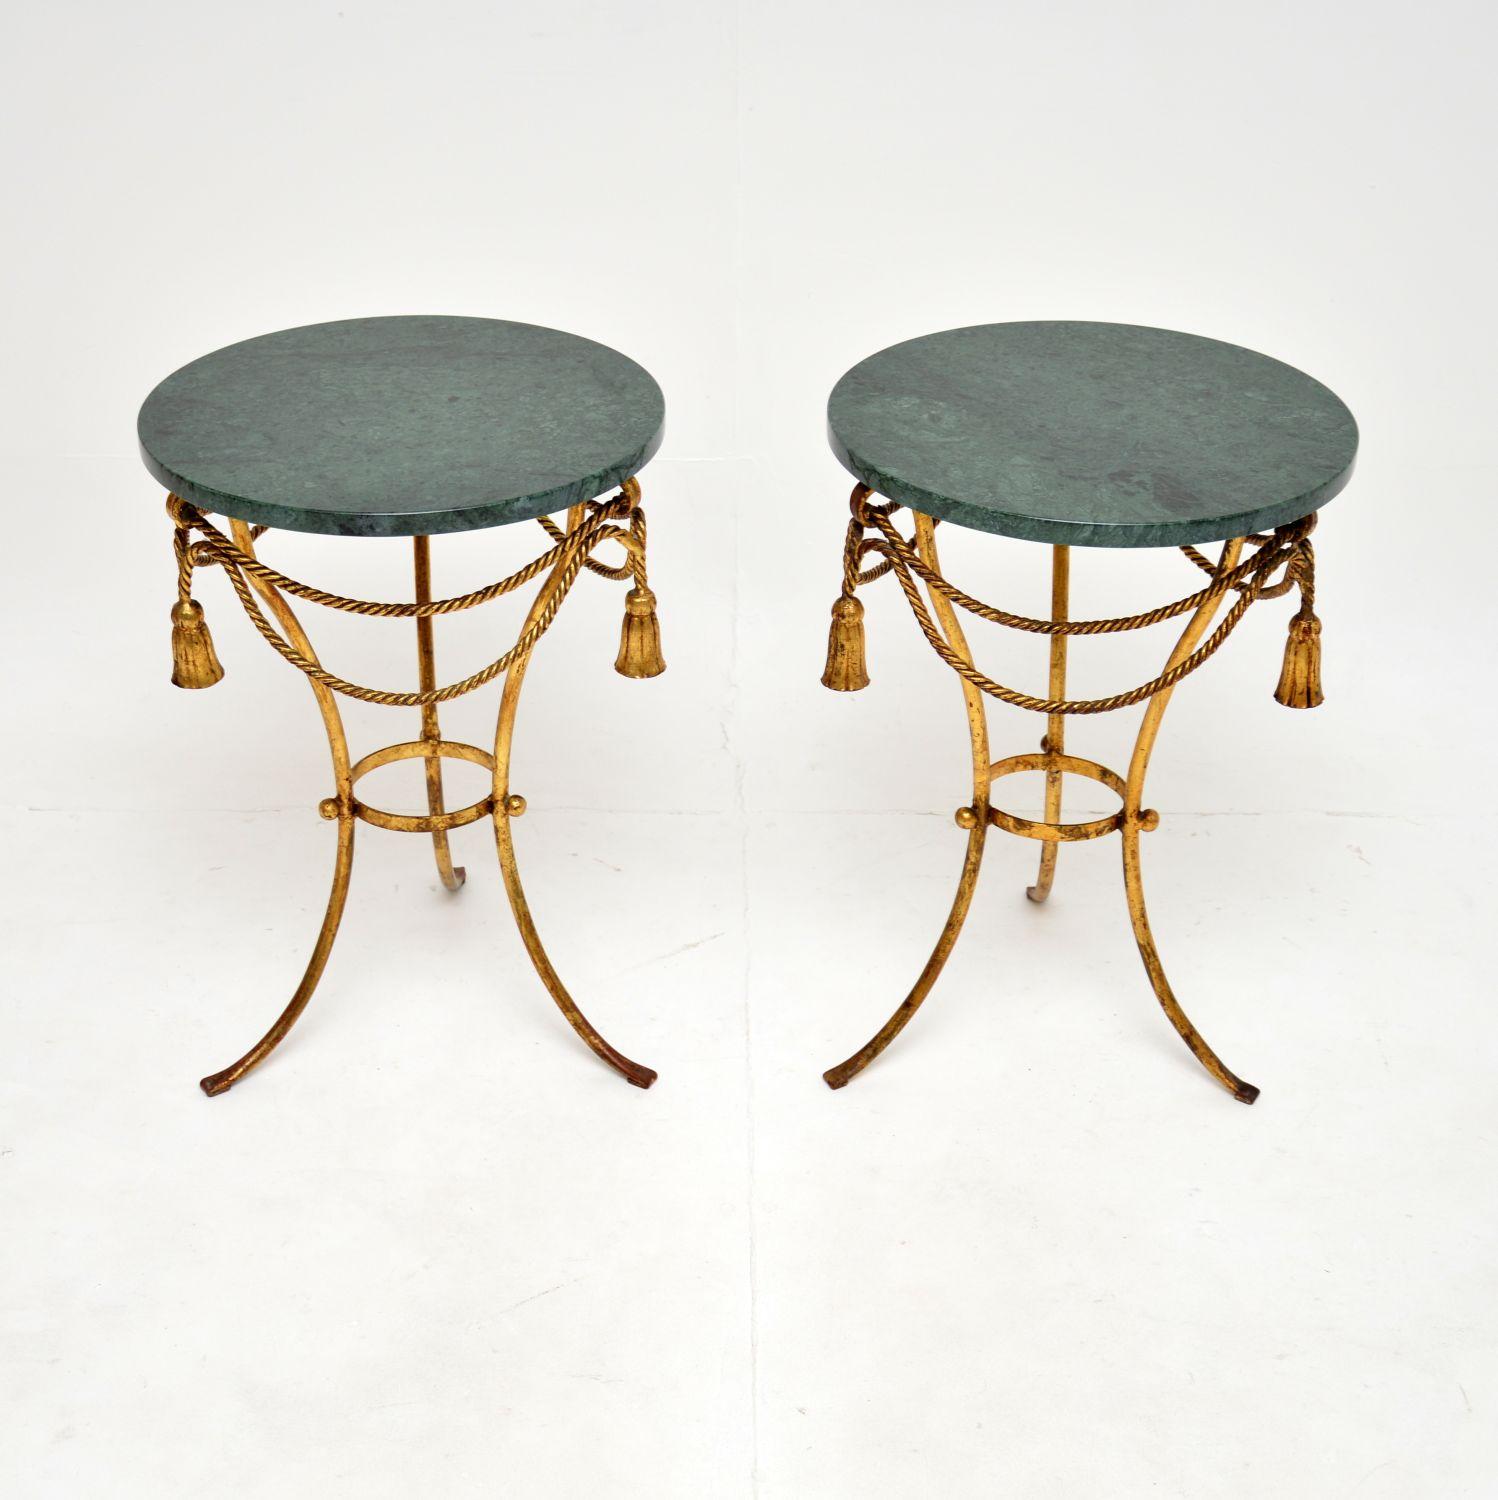 A superb pair of antique Italian gilt metal and marble side tables. They were made in Italy in the Hollywood Regency style, they date from the 1950’s.

The quality is absolutely superb, the gilt metal frames have a gorgeous rope twist and tassel